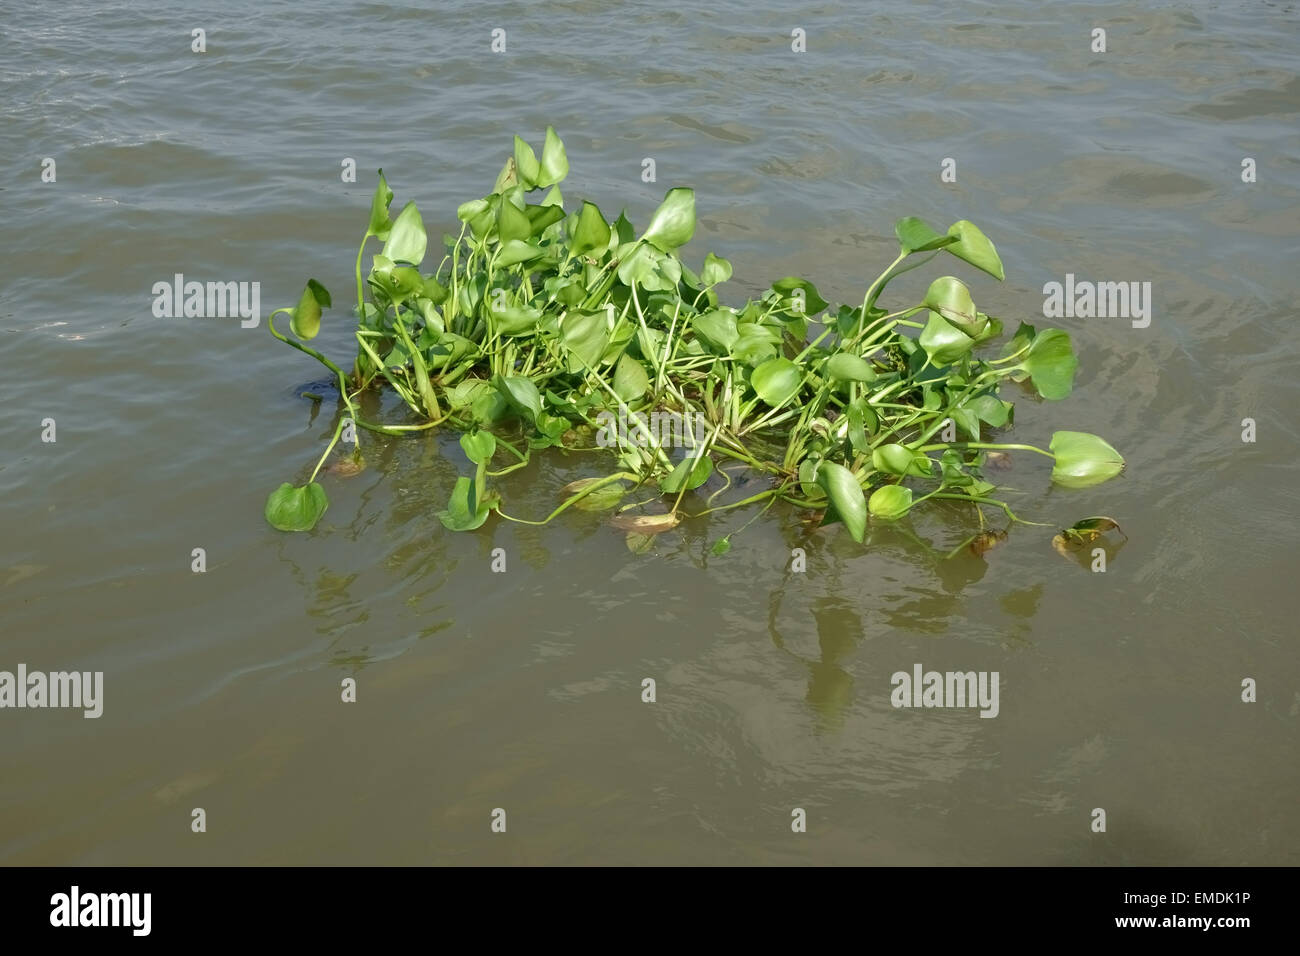 Floating water hyacinth, Eichhornia crassipes, floating in the Chao Phraya River and invasive a clogging weed of waterways Stock Photo